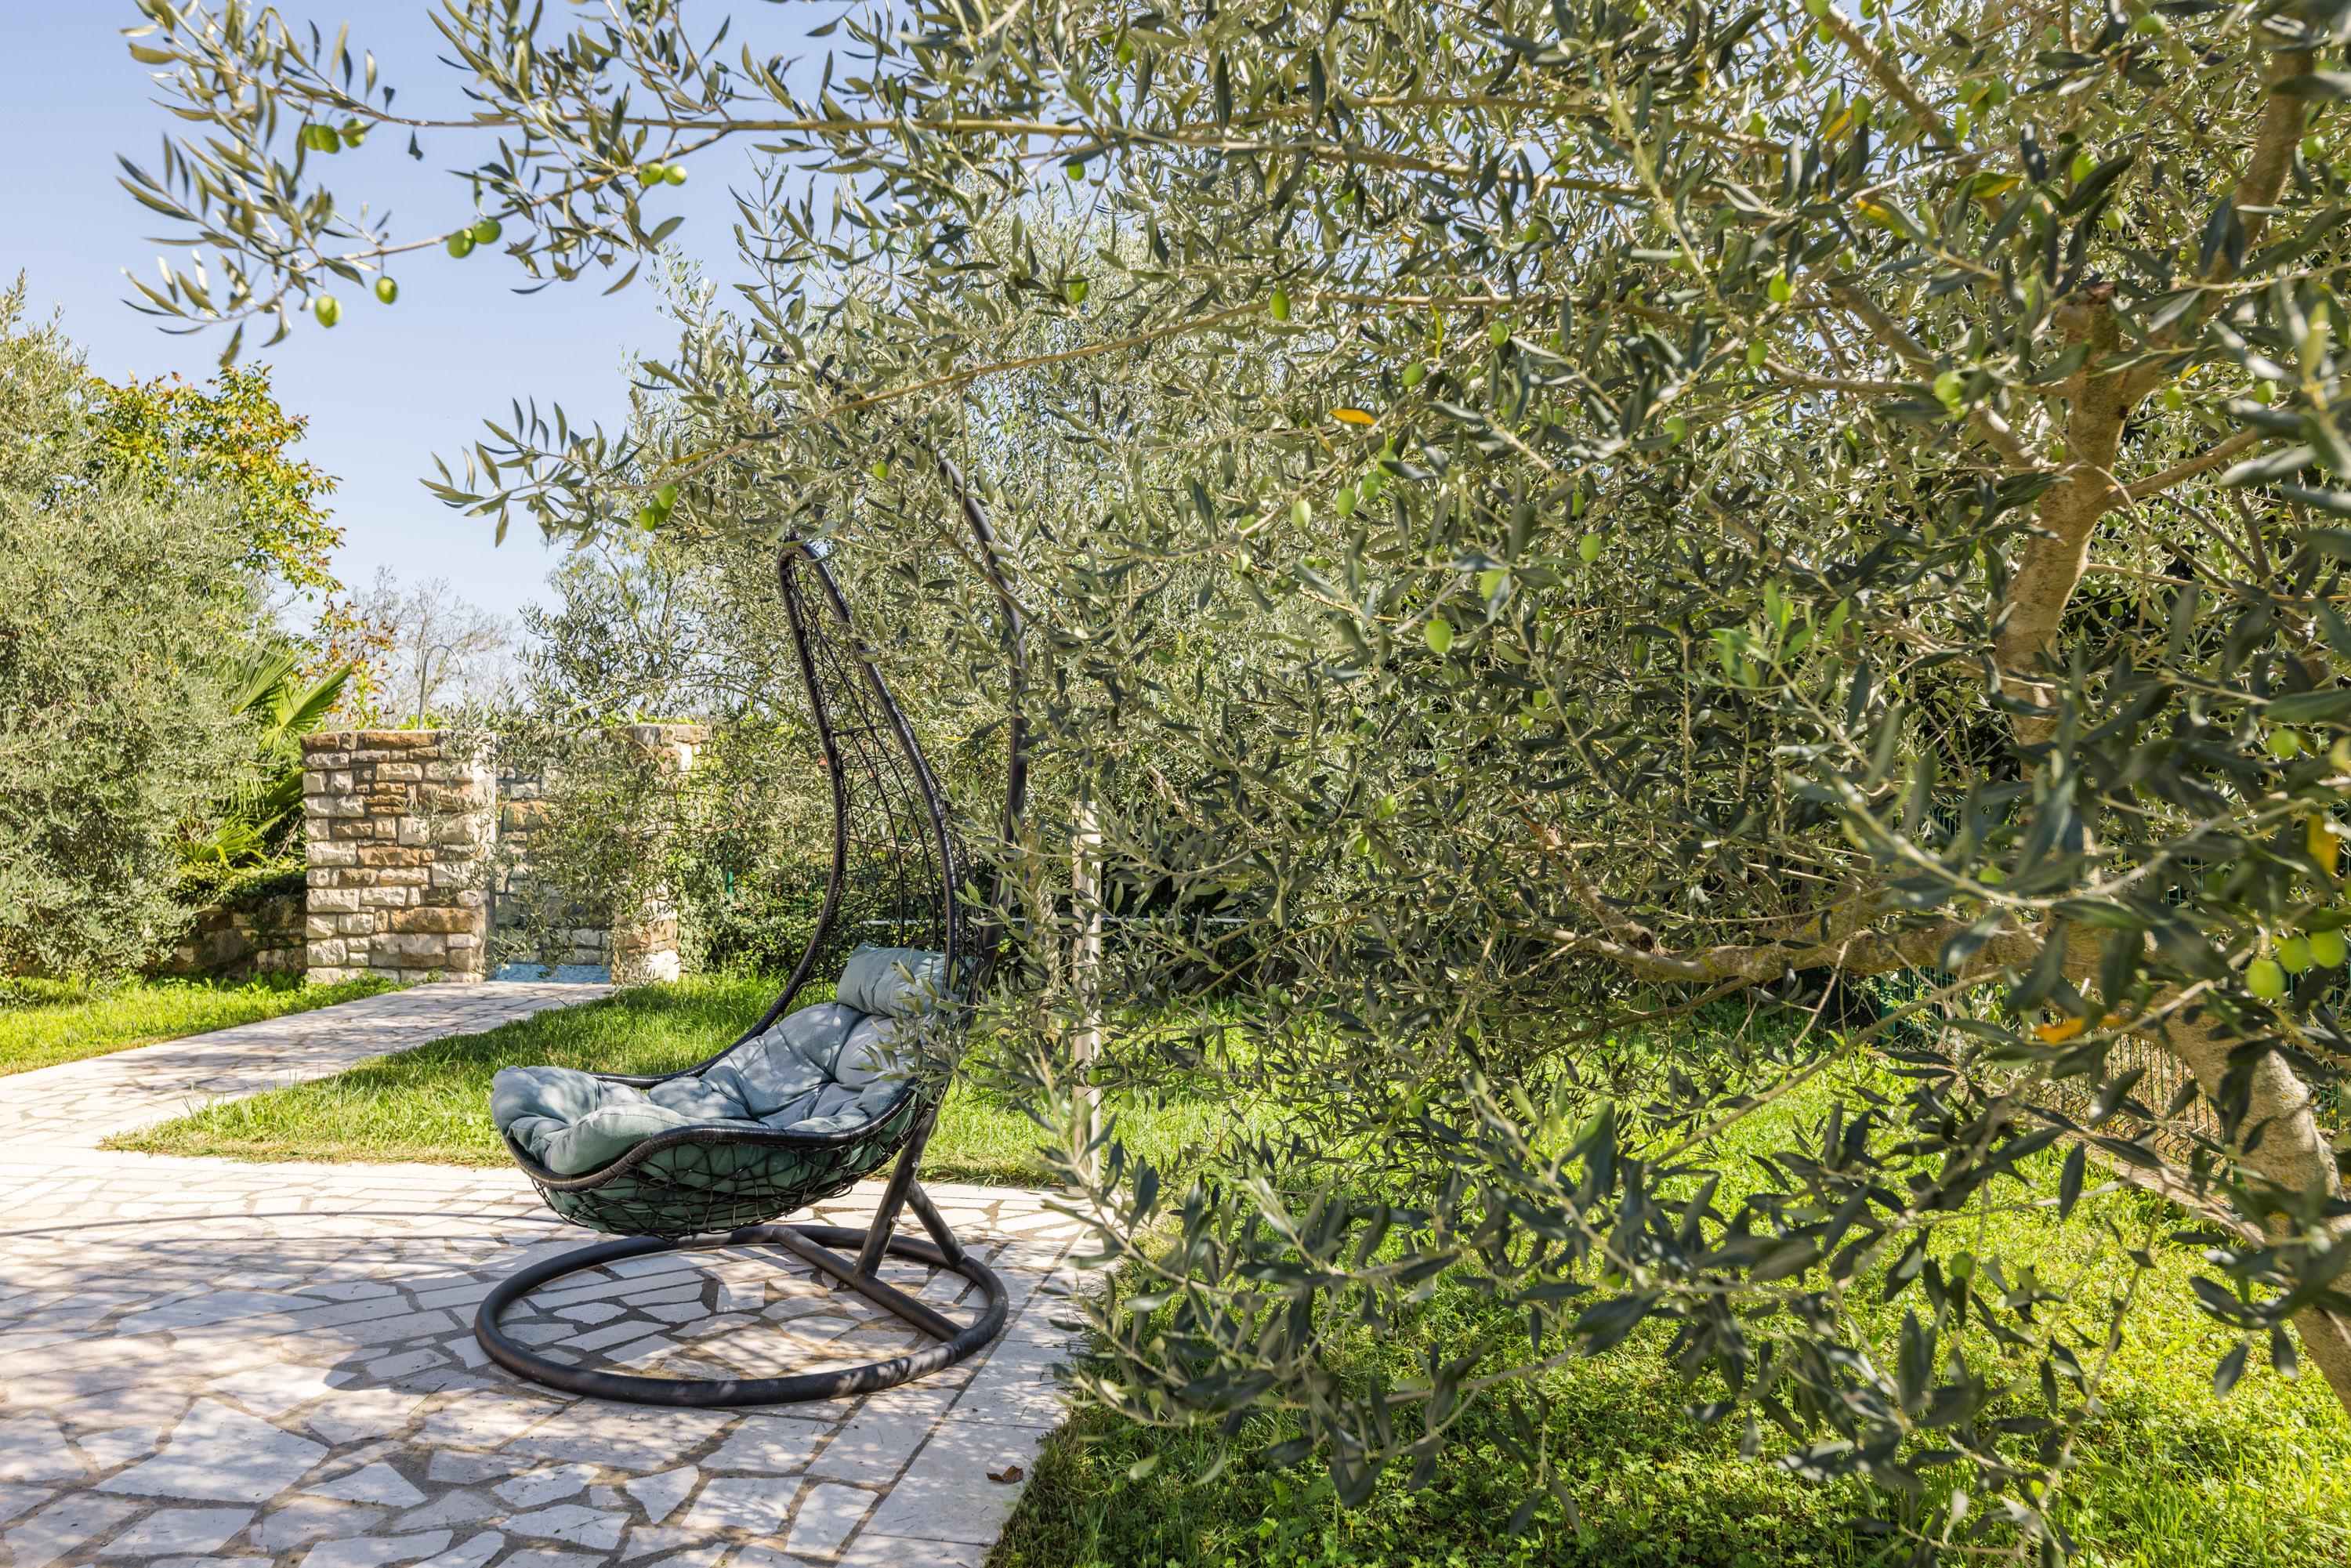 Swing lounger under olive tree shade